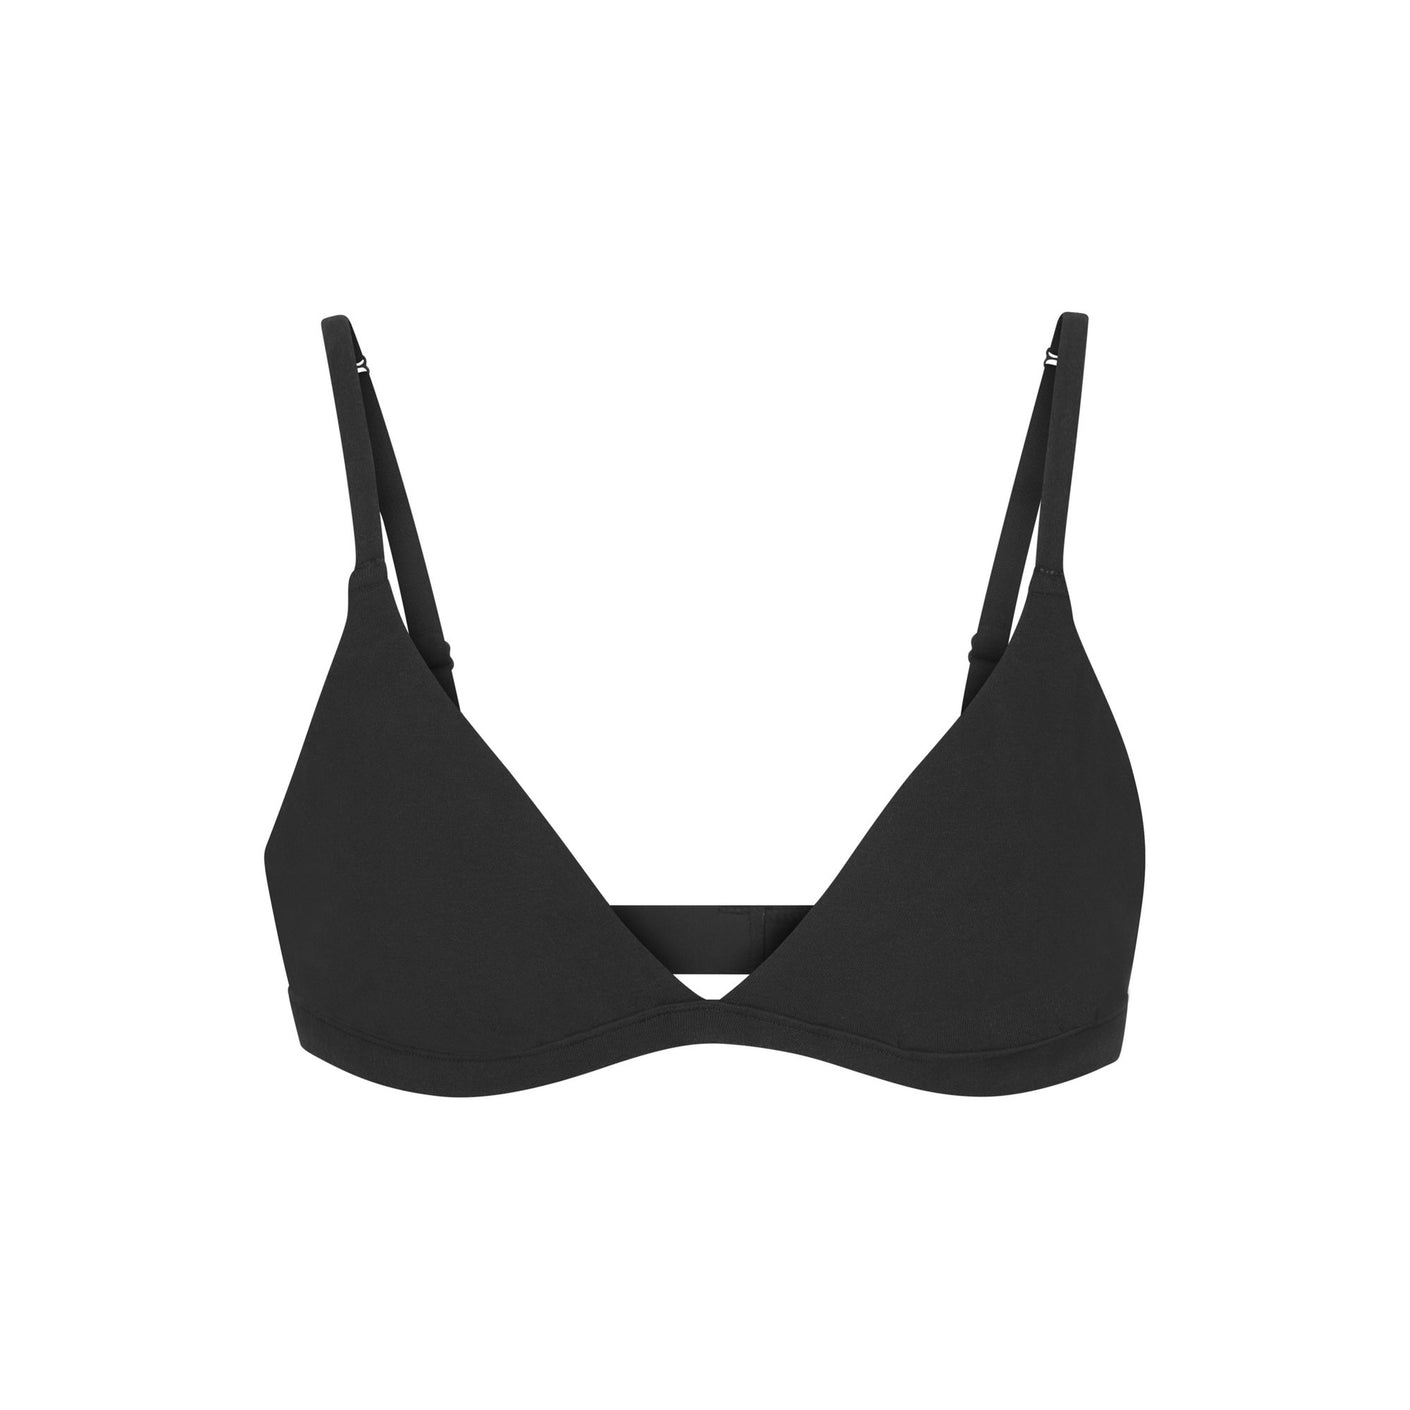 SKIMS - The Cotton Molded Bra ($56) in Mineral — designed with the soft,  cool comfort and natural breathability of cotton. Shop now before it's gone  at SKIMS.COM and enjoy free shipping